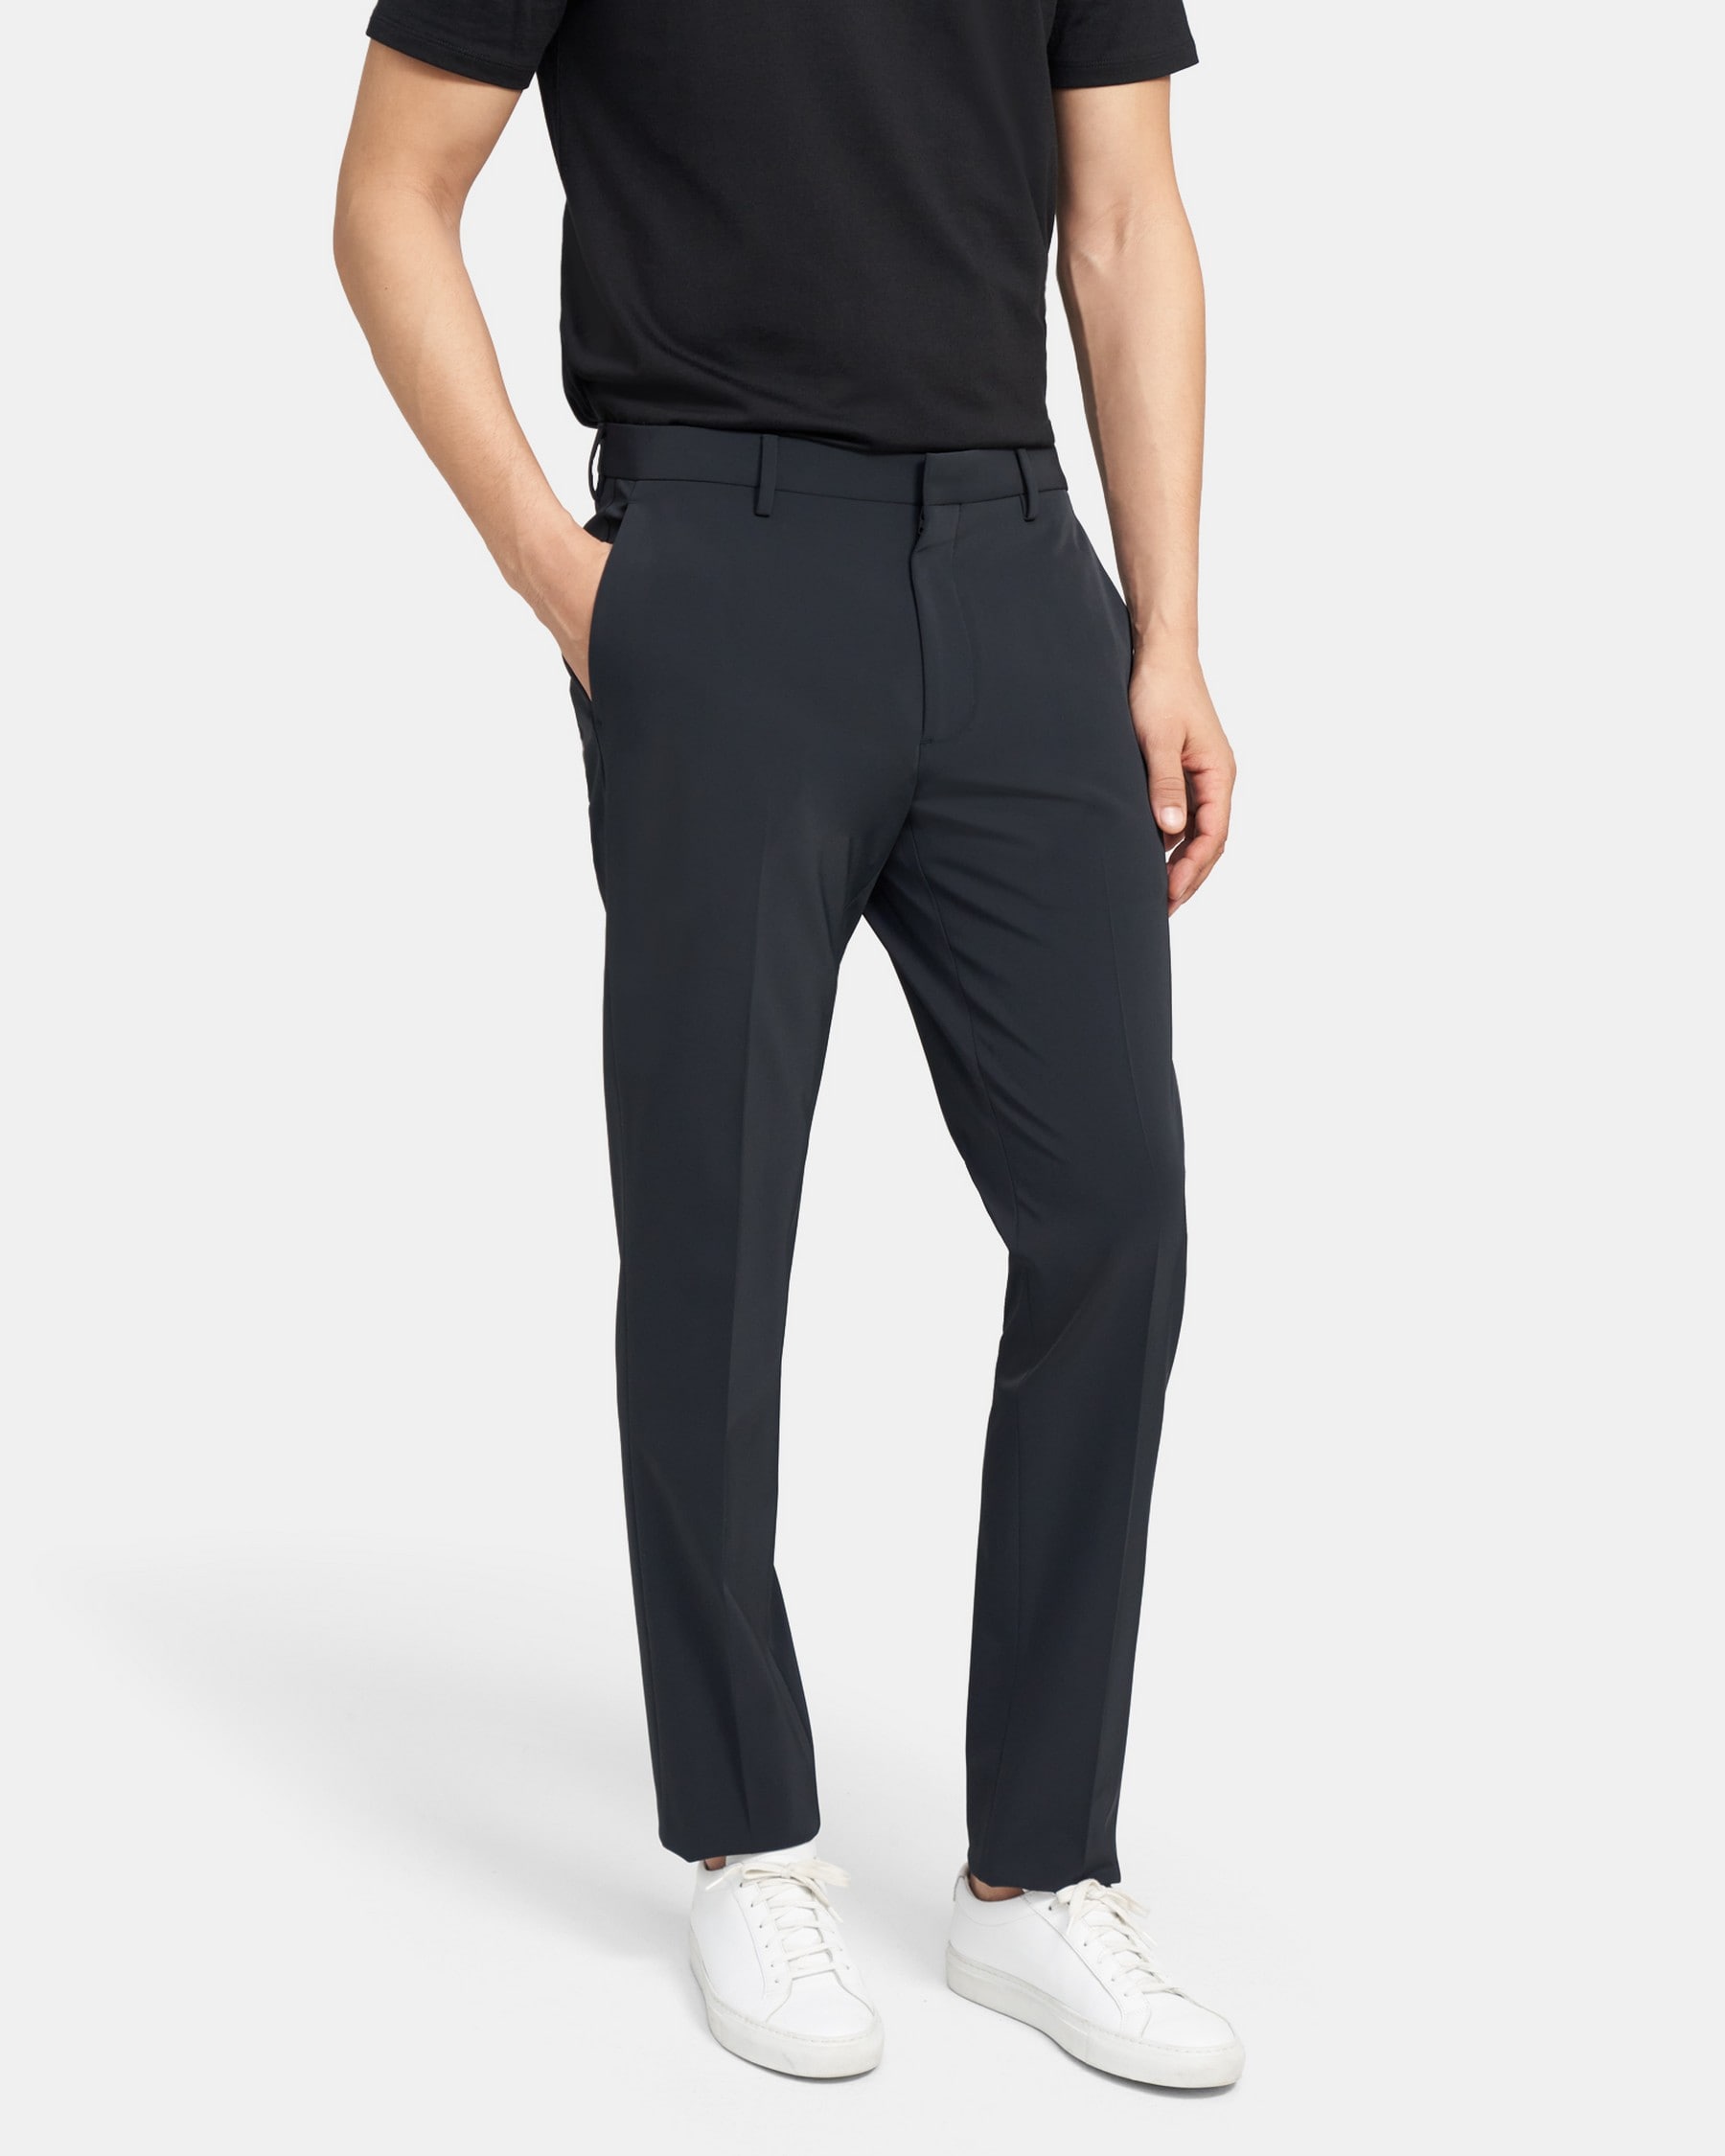 Classic-Fit Pant in Saronni Tech